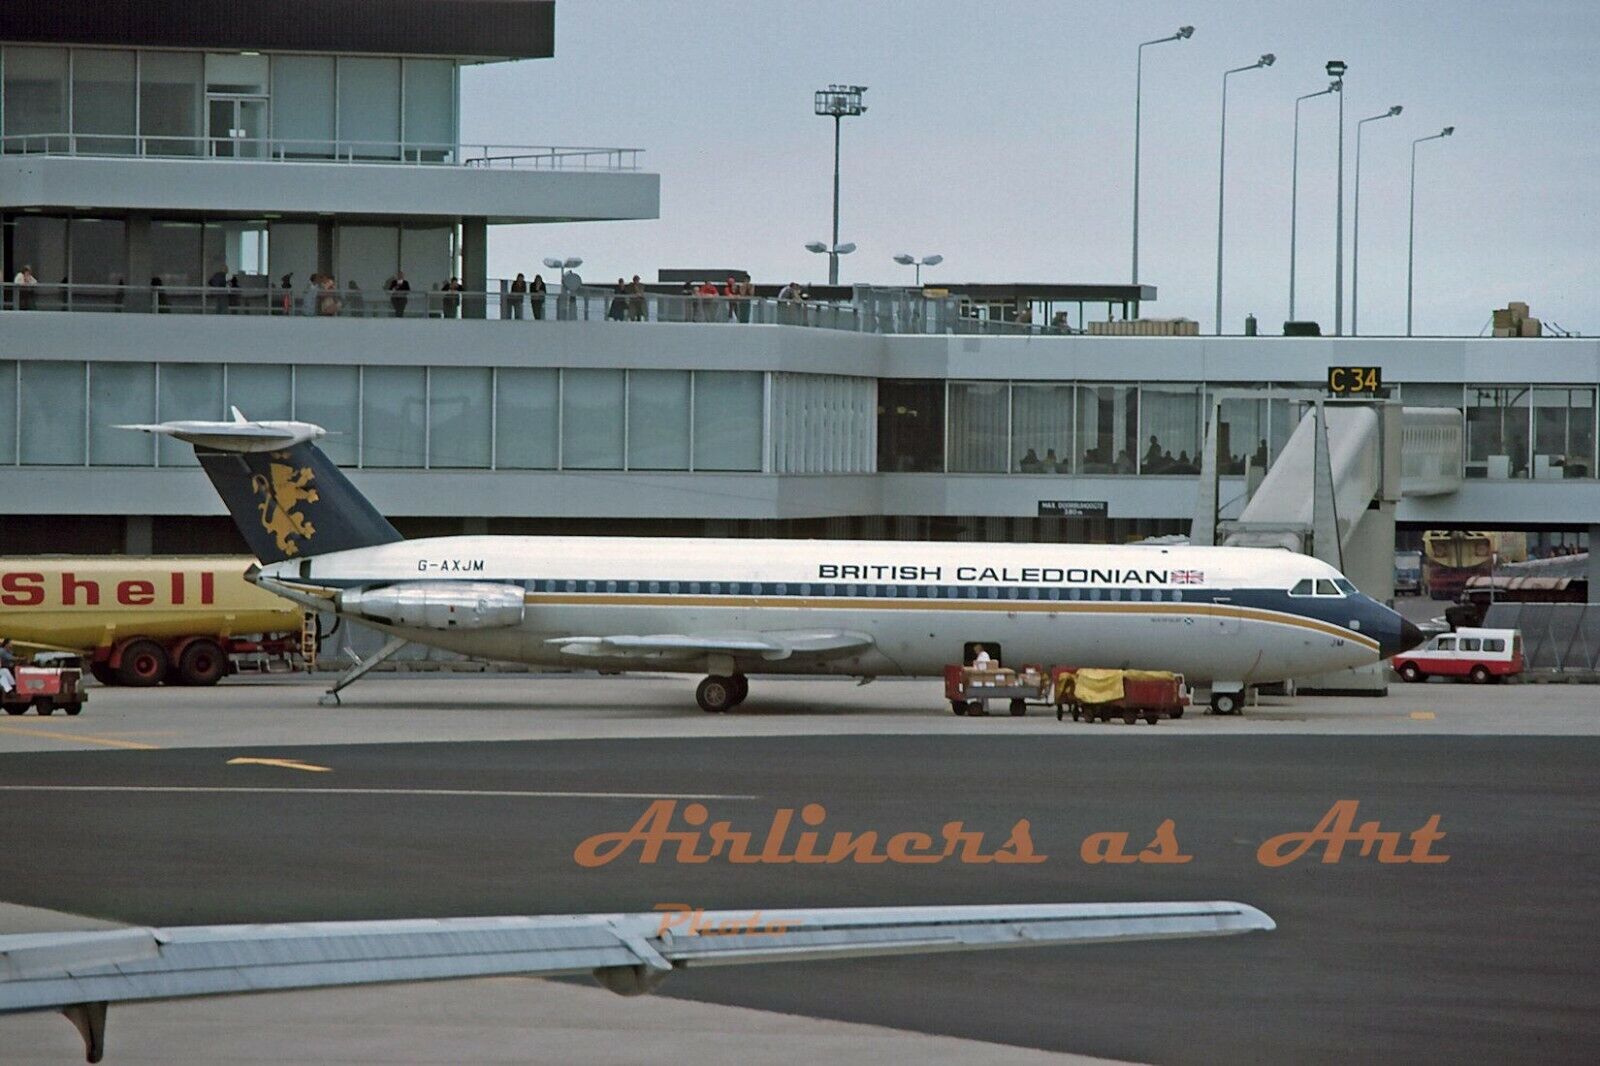 British Caledonian BAC 1-11 G-AXJM at AMS in August 1975 8\